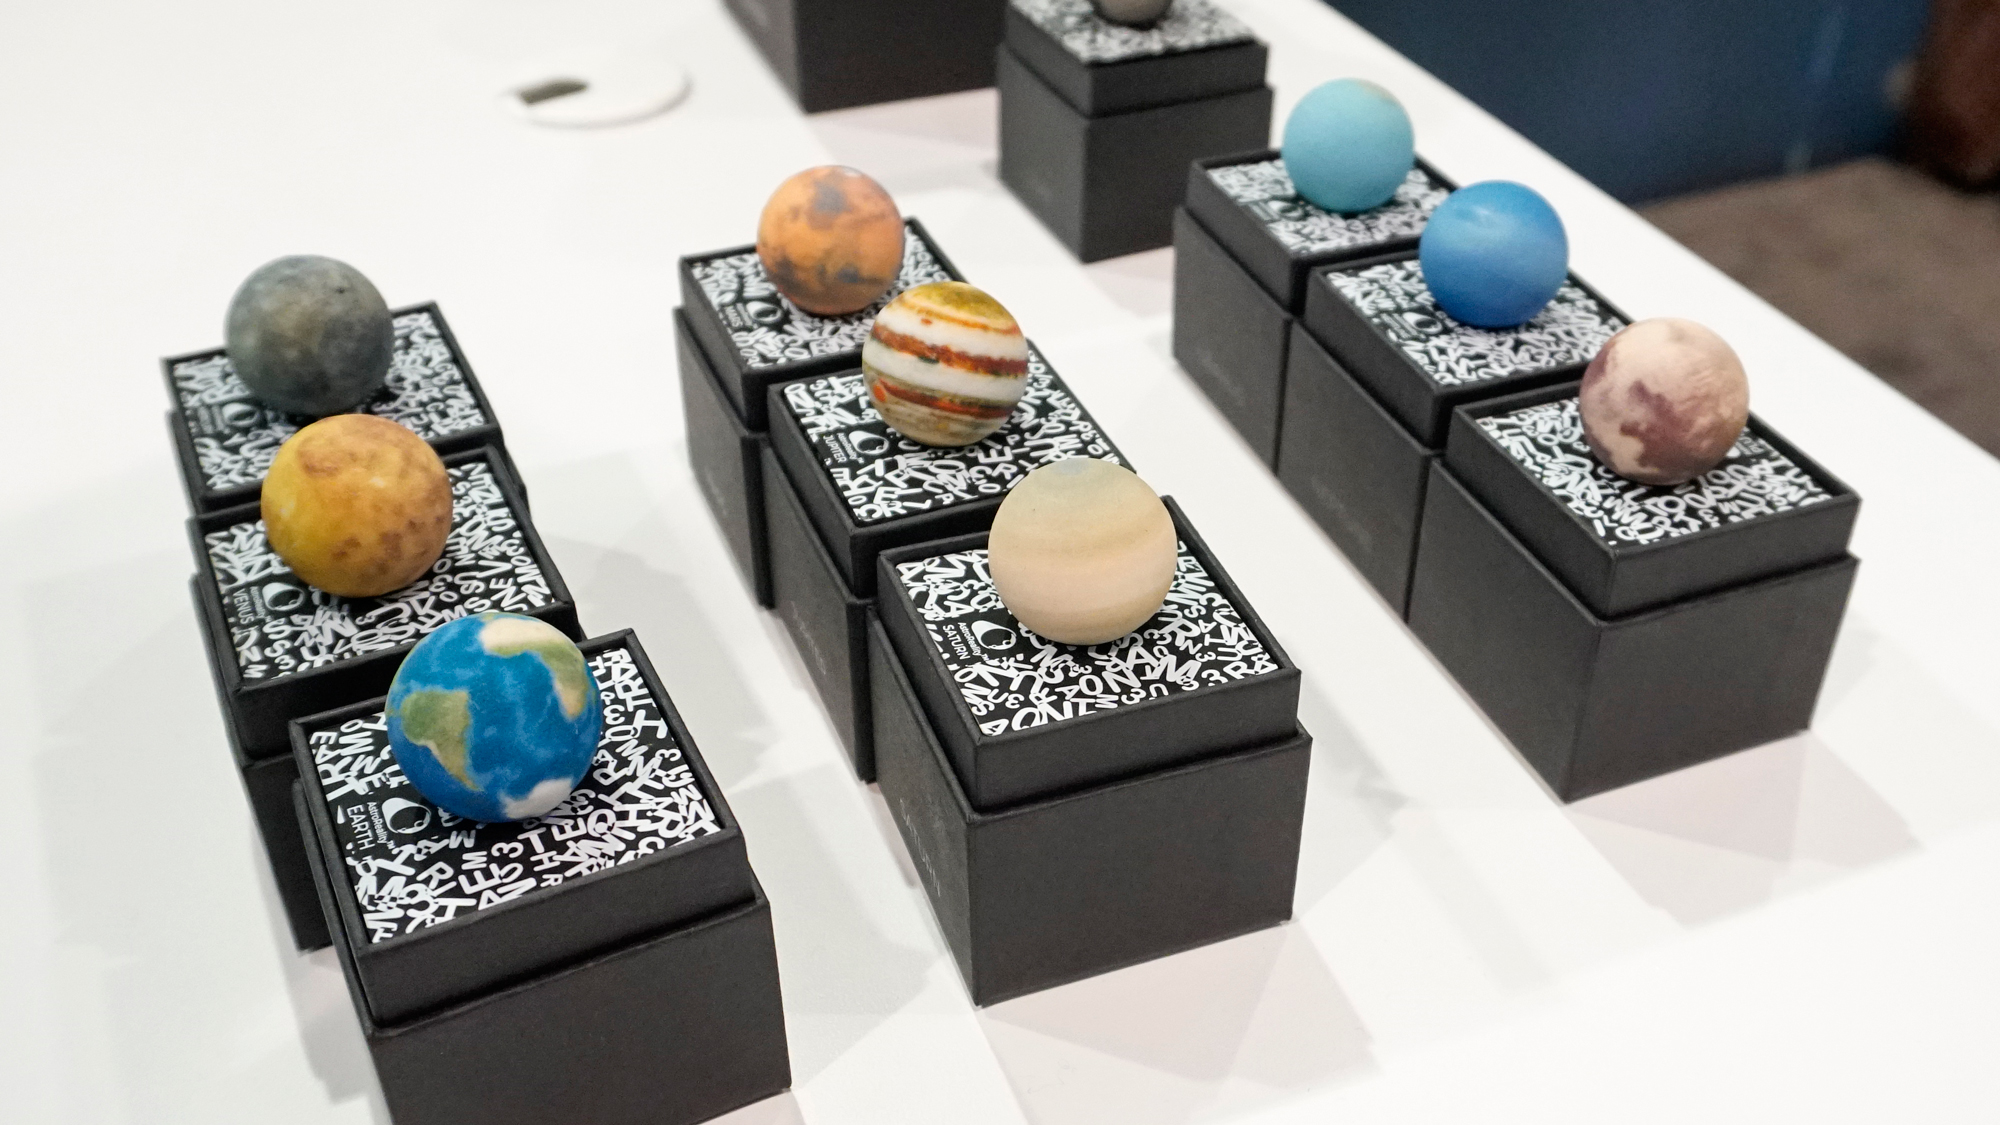 This Beautifully-Detailed Replica Is The Best Way To Learn About The Moon Without Actually Visiting It